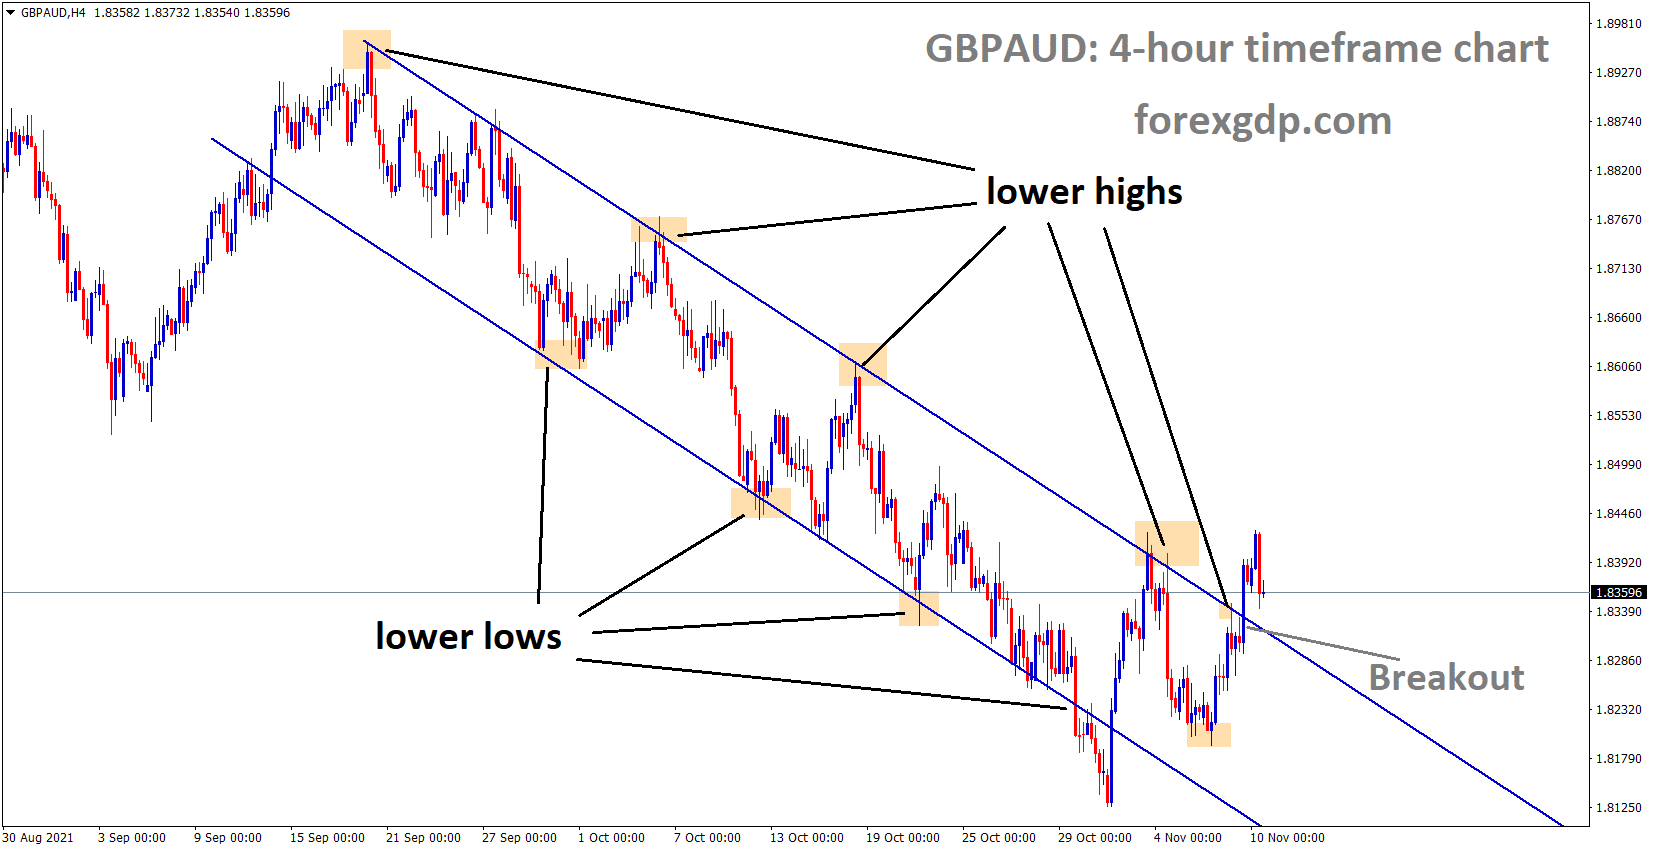 GBPAUD has broken the Descending channel and the market is again trying to retest the broken channel area